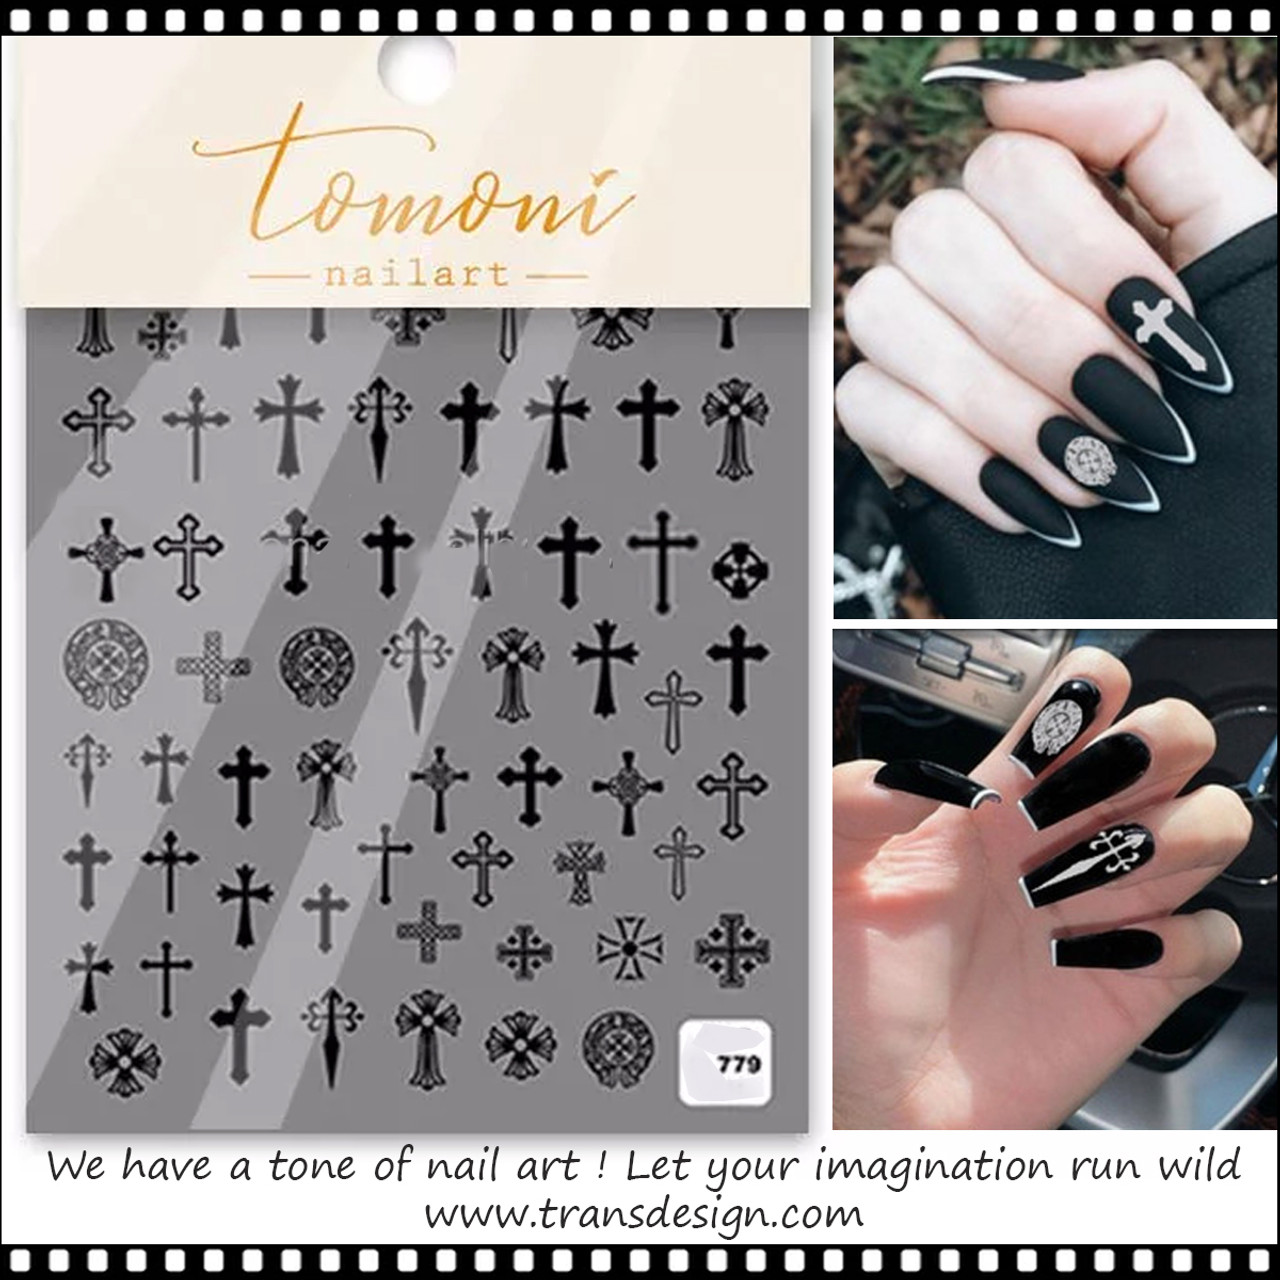 9 Goth Nail Ideas That Are Better Than Just Black | Goth nails, Witchy nails,  Grunge nails